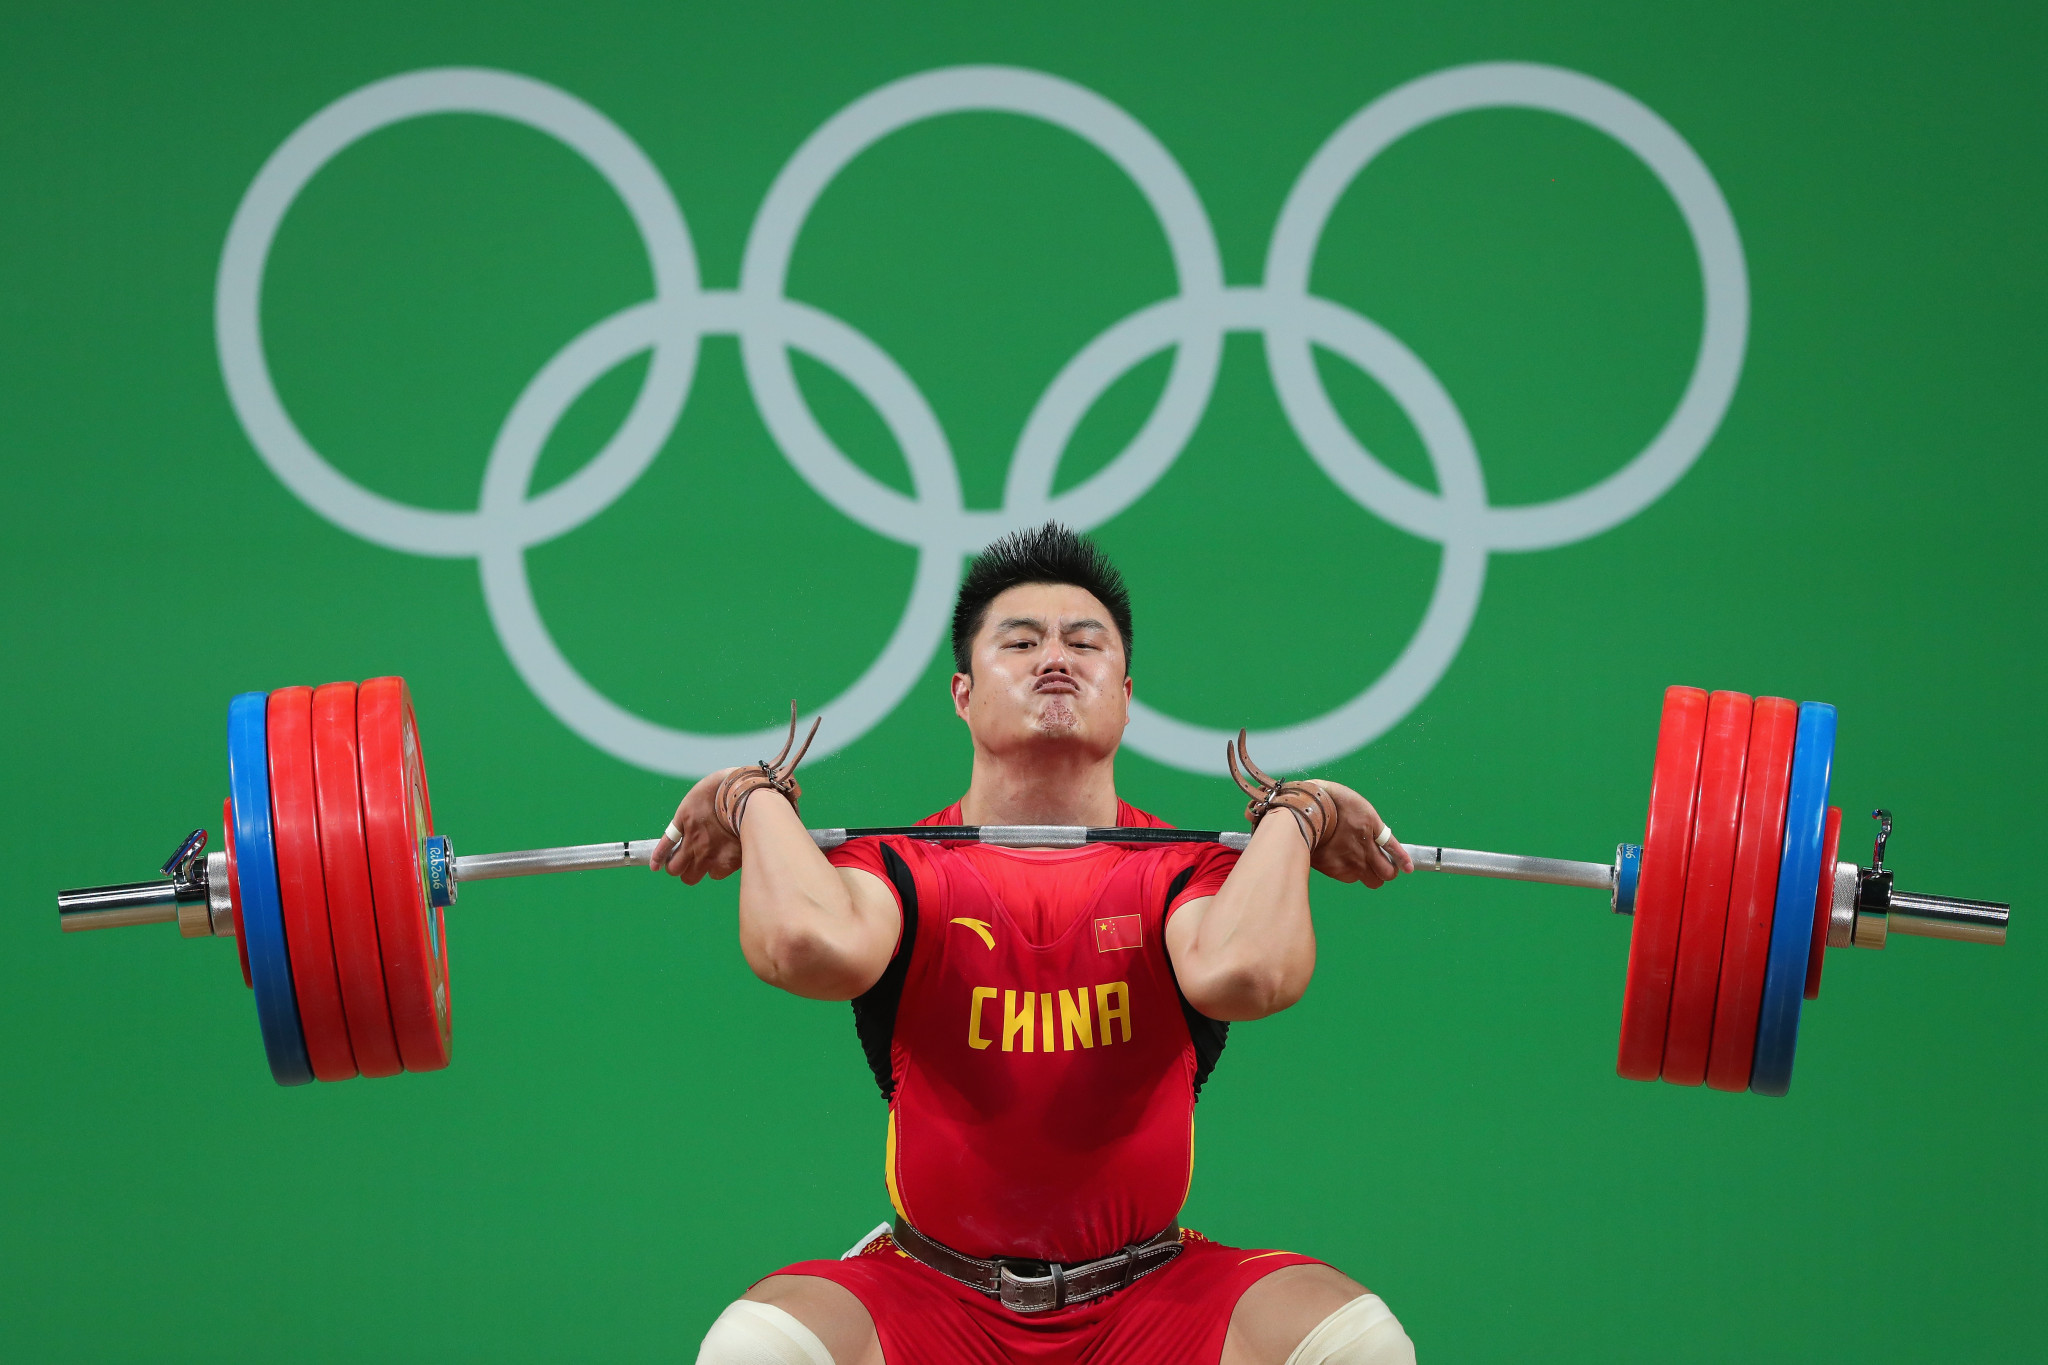 Yang Zhe secured two of the three available gold medals in the men's 109kg division ©Getty Images